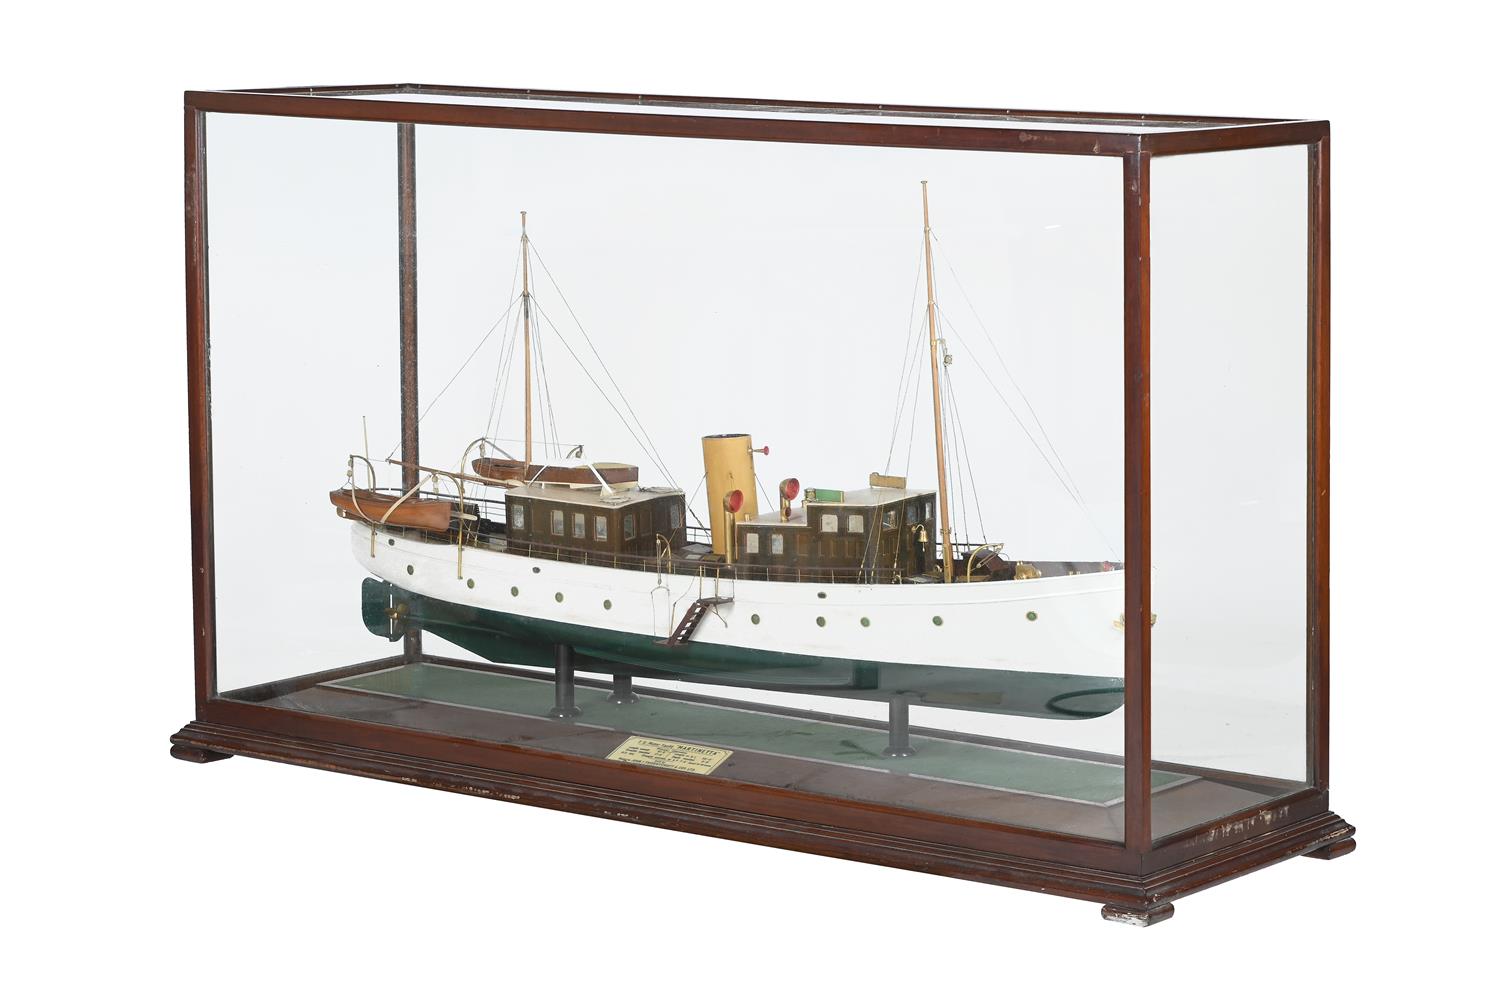 A SHIP BUILDERS MODEL OF 'MARTINETTA' A STEAM YACHT BUILT BY JOHN I. THORNYCROFT IN 1929 - Image 2 of 3